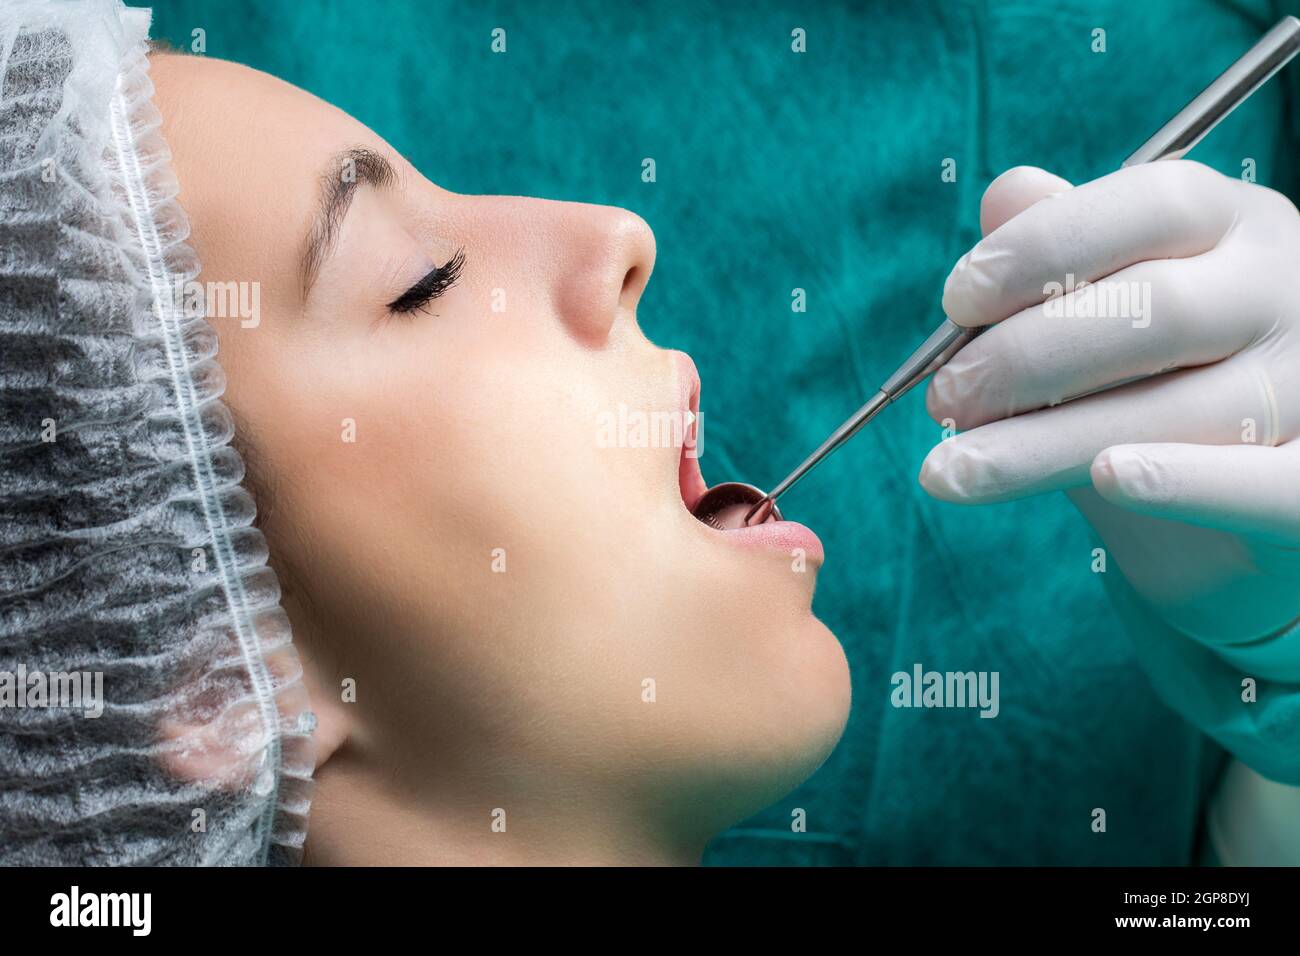 Close up macro side view face shot of woman being prepared for dental surgery.Hand with glove doing check up with mouth mirror on teeth. Stock Photo